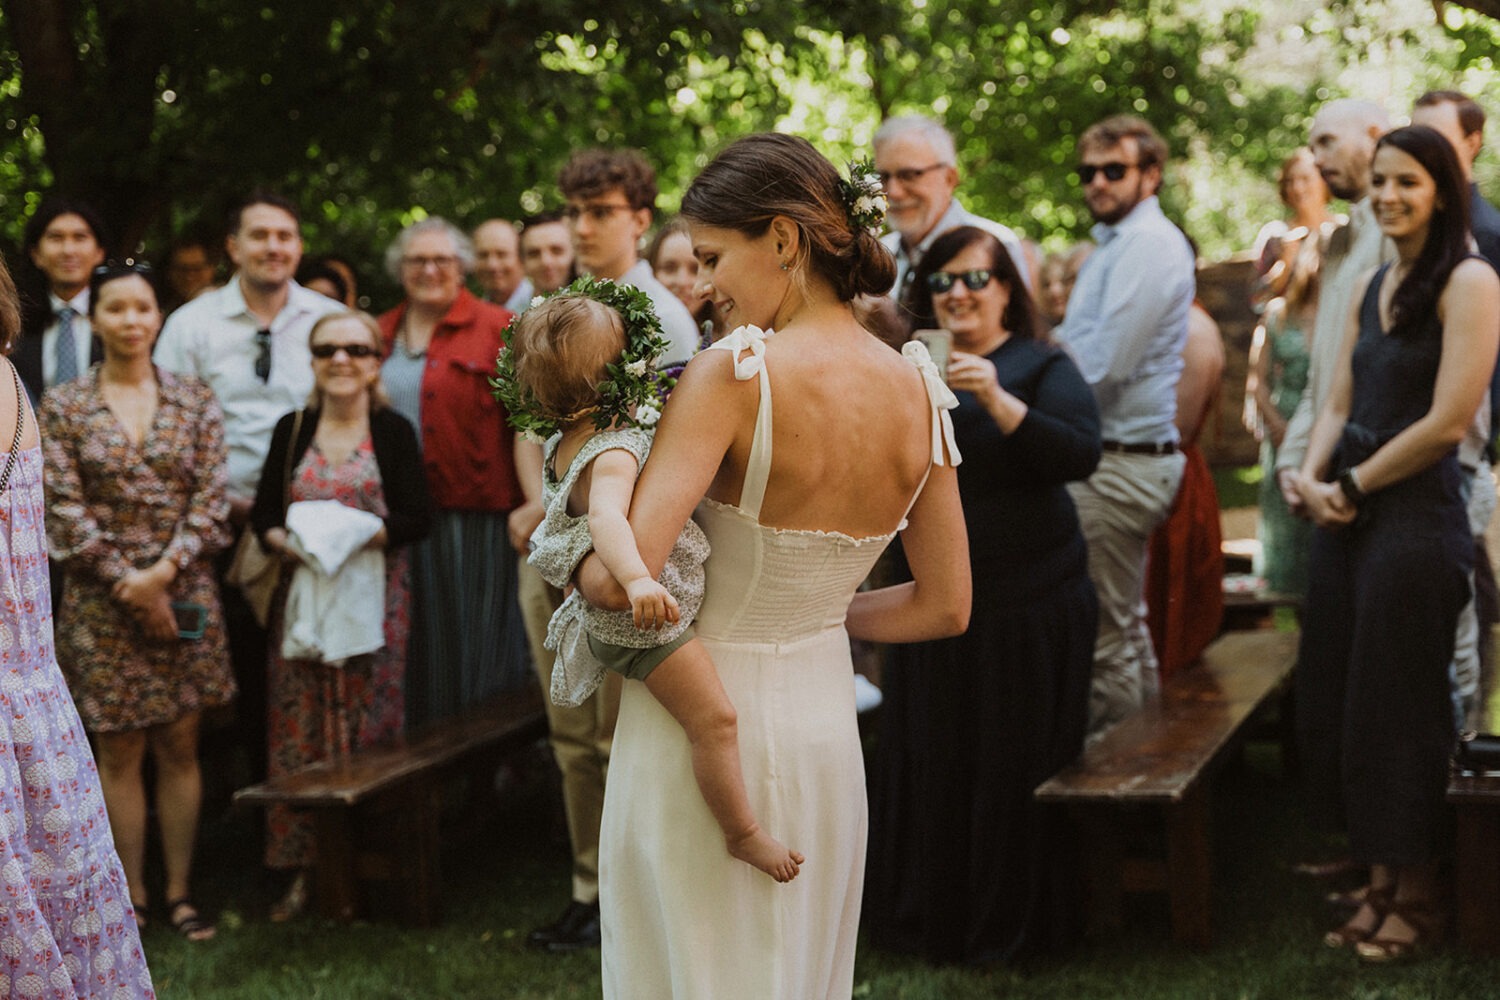 bride carries baby down aisle at outdoor rustic wedding